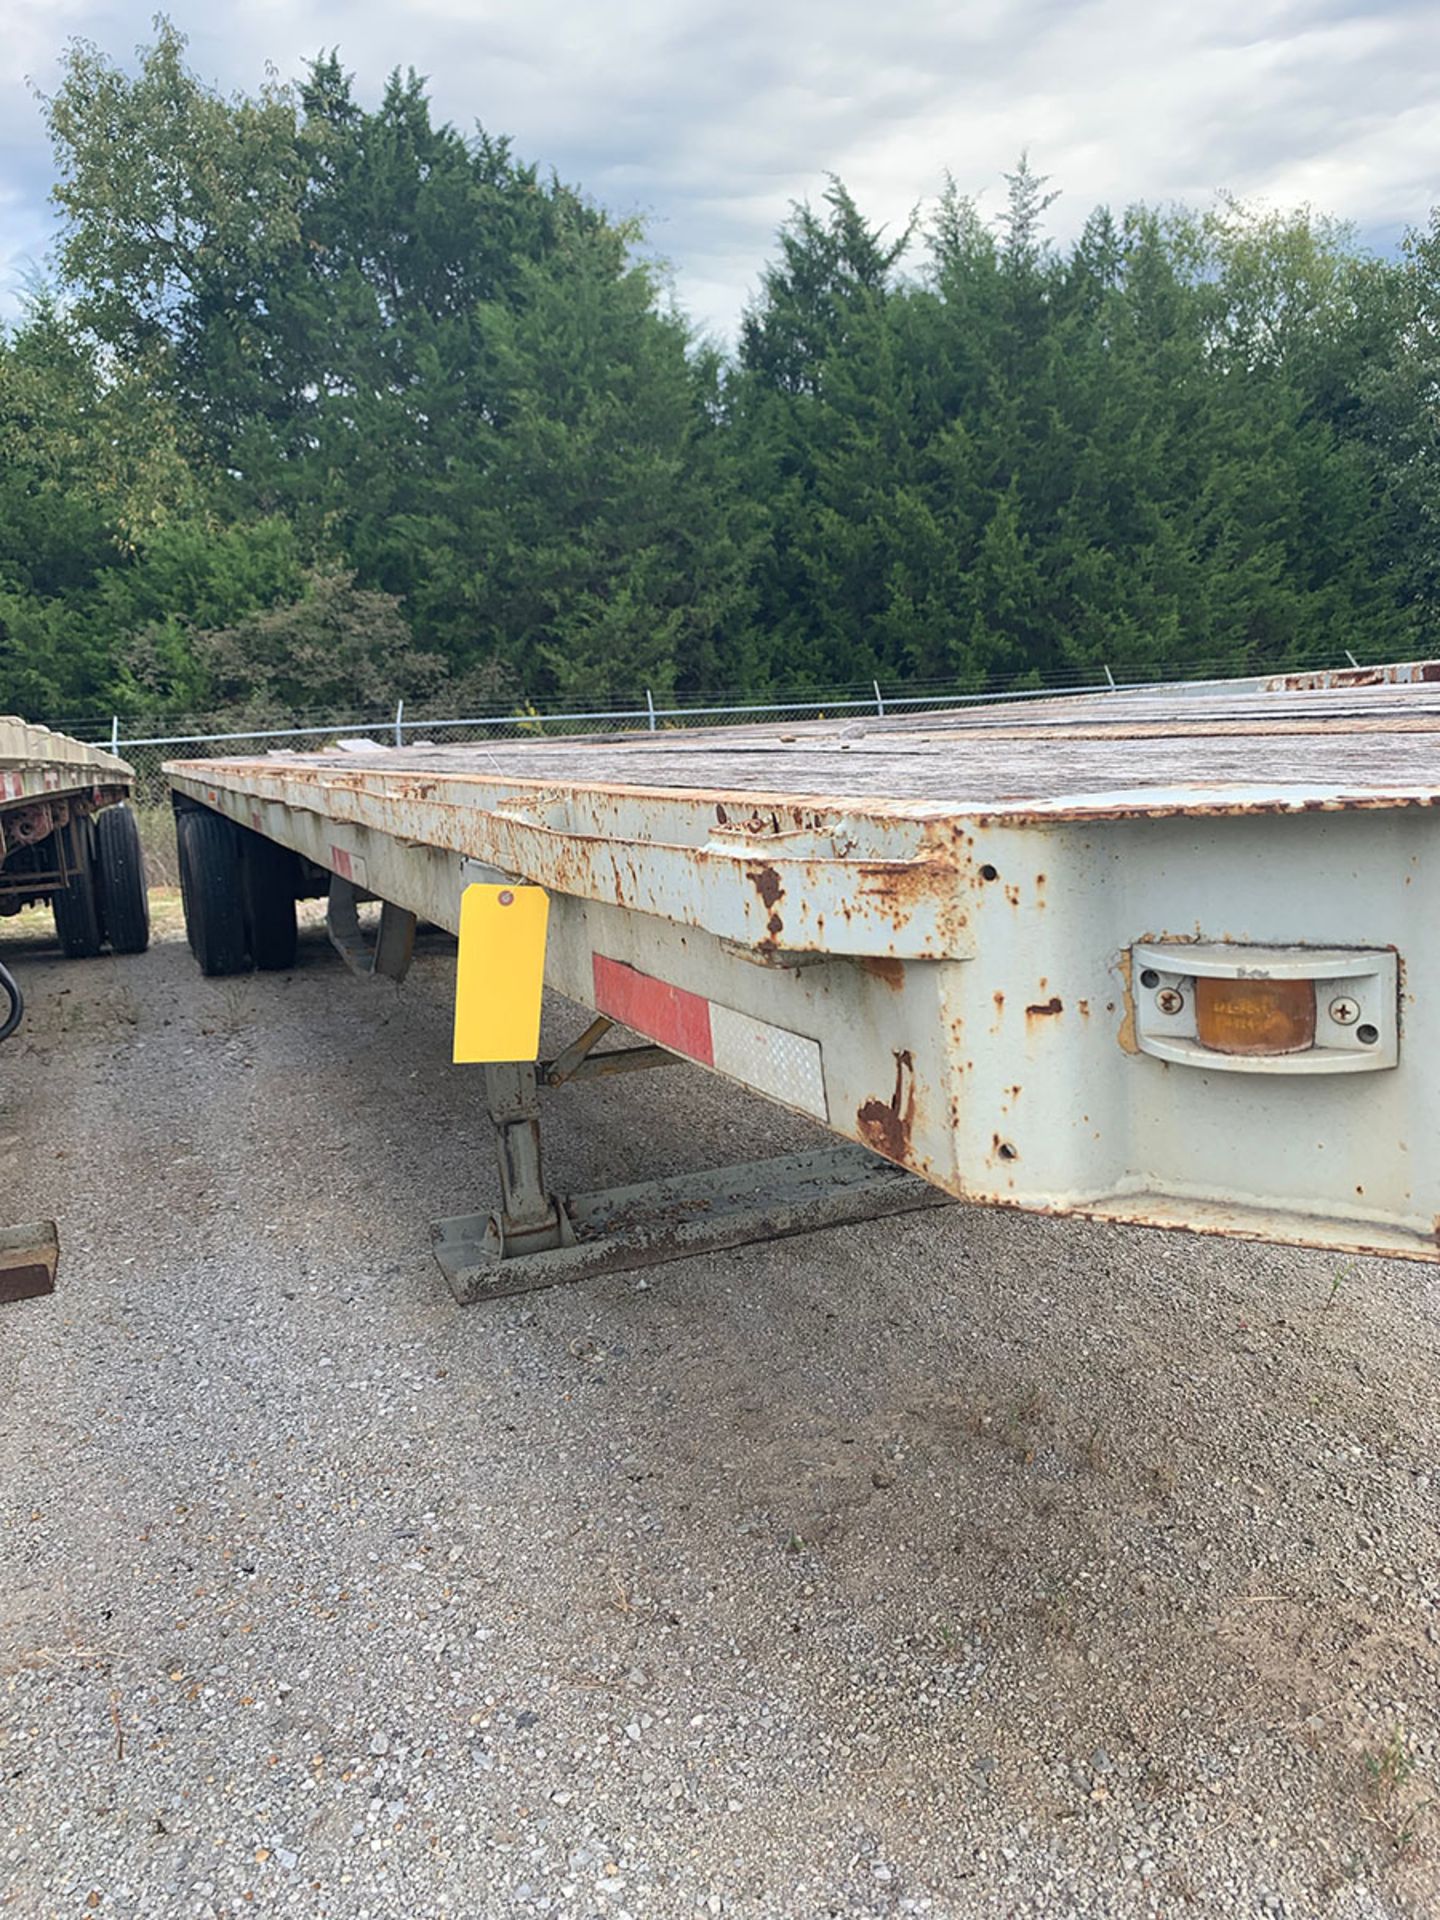 FONTAINE 40' FLATBED TRAILER, T/A, WOOD DECK, AIR RIDE SUSPENSION